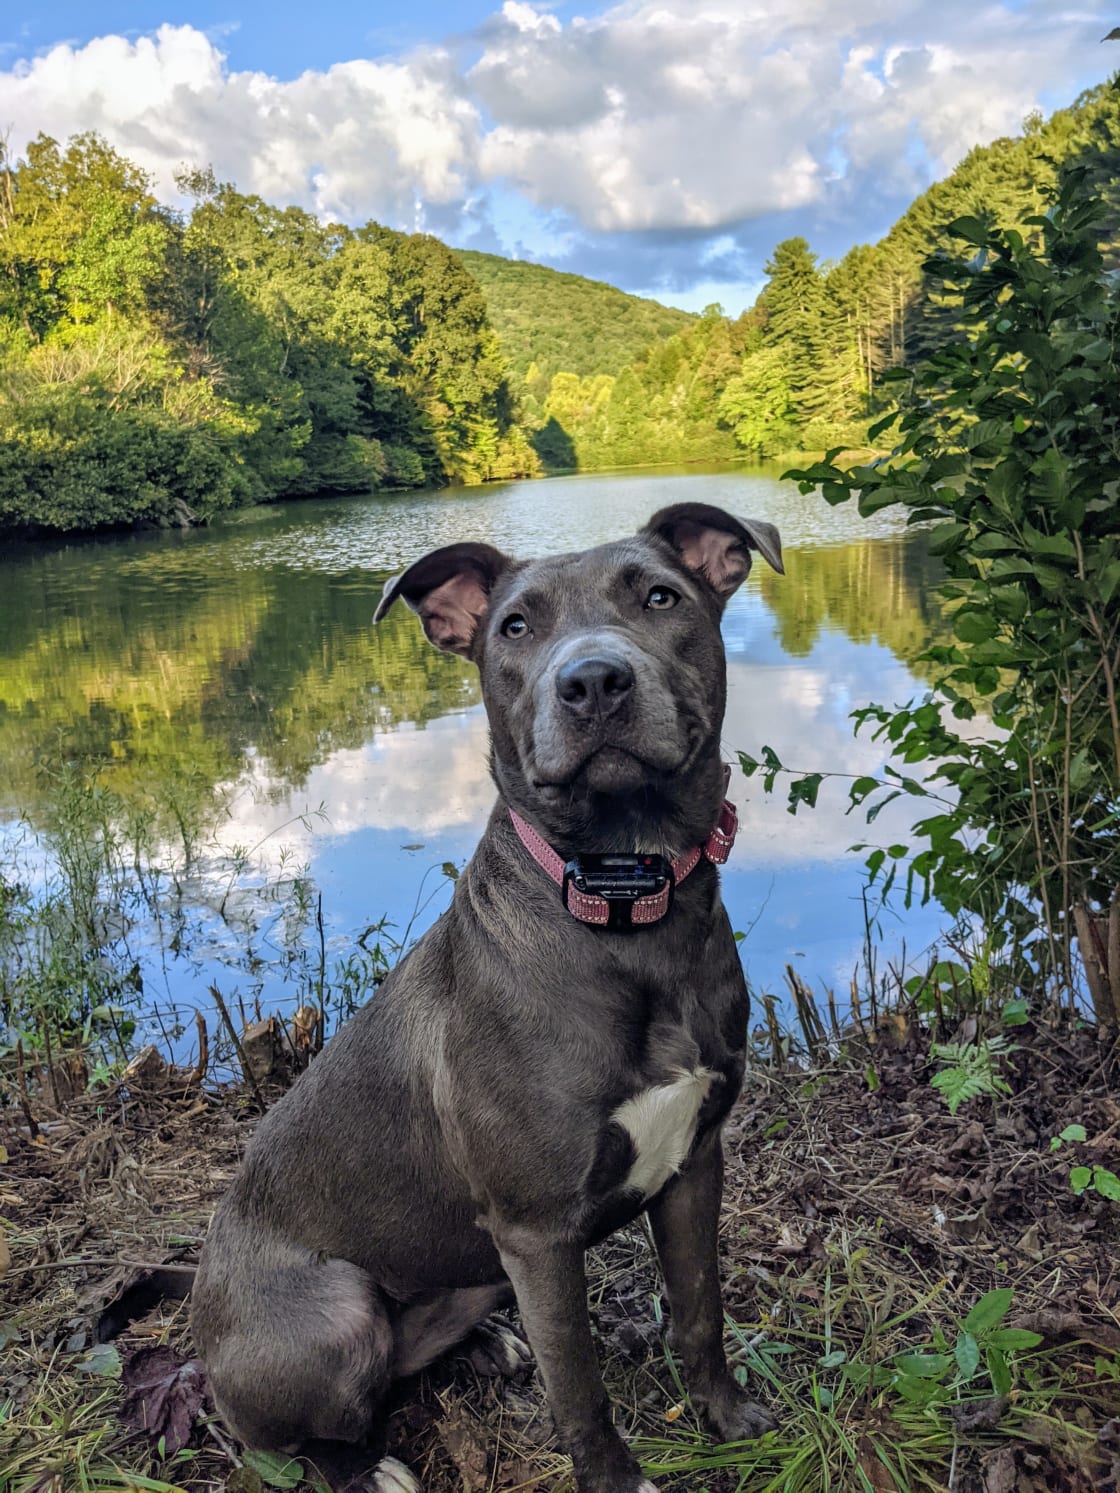 Zofifi approves! She had the best time exploring and fishing with me. 